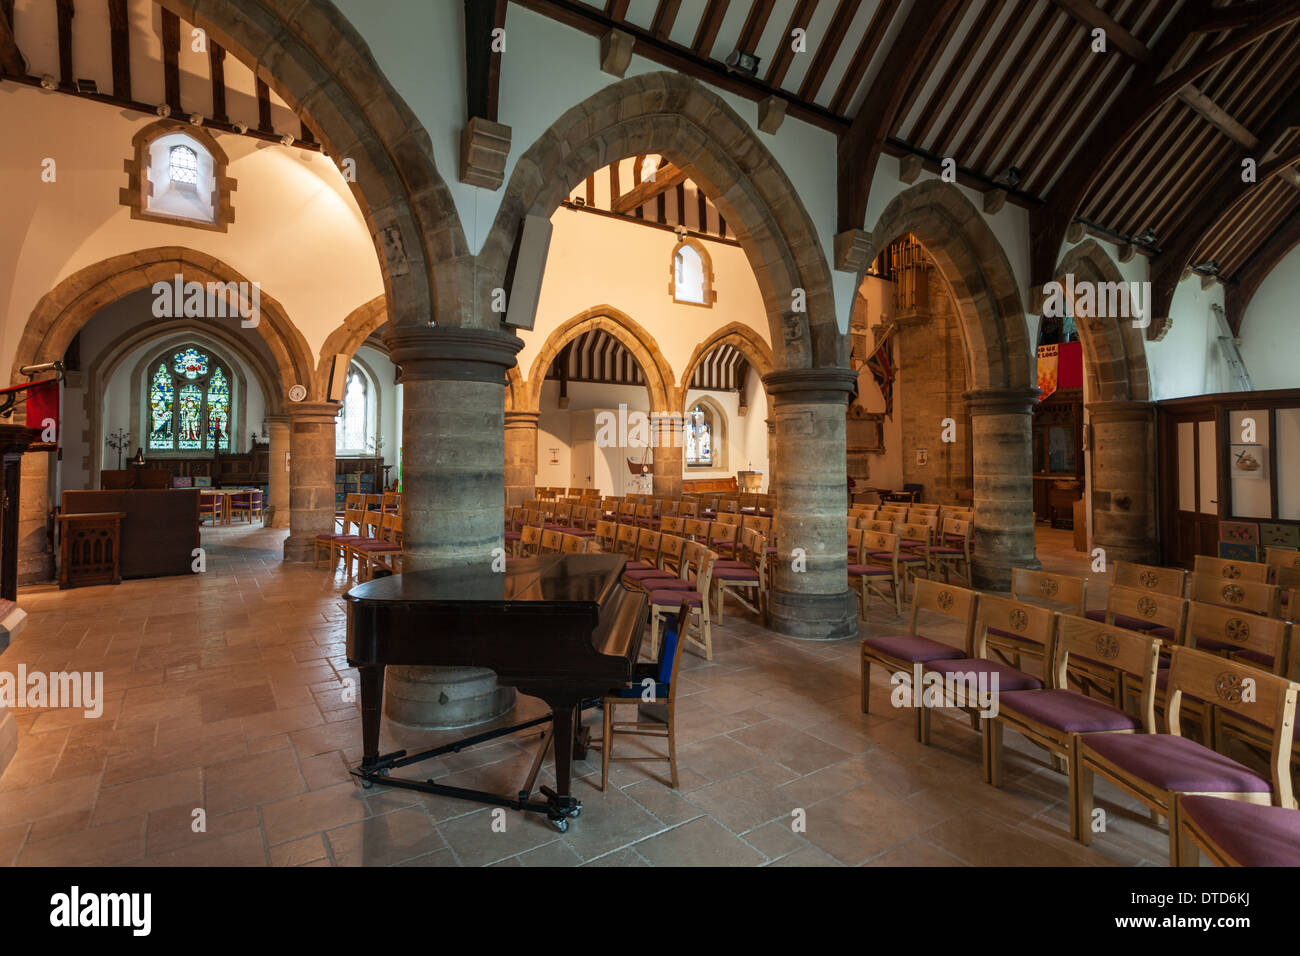 St Peter's church interior in Henfield, East Sussex, England. Stock Photo